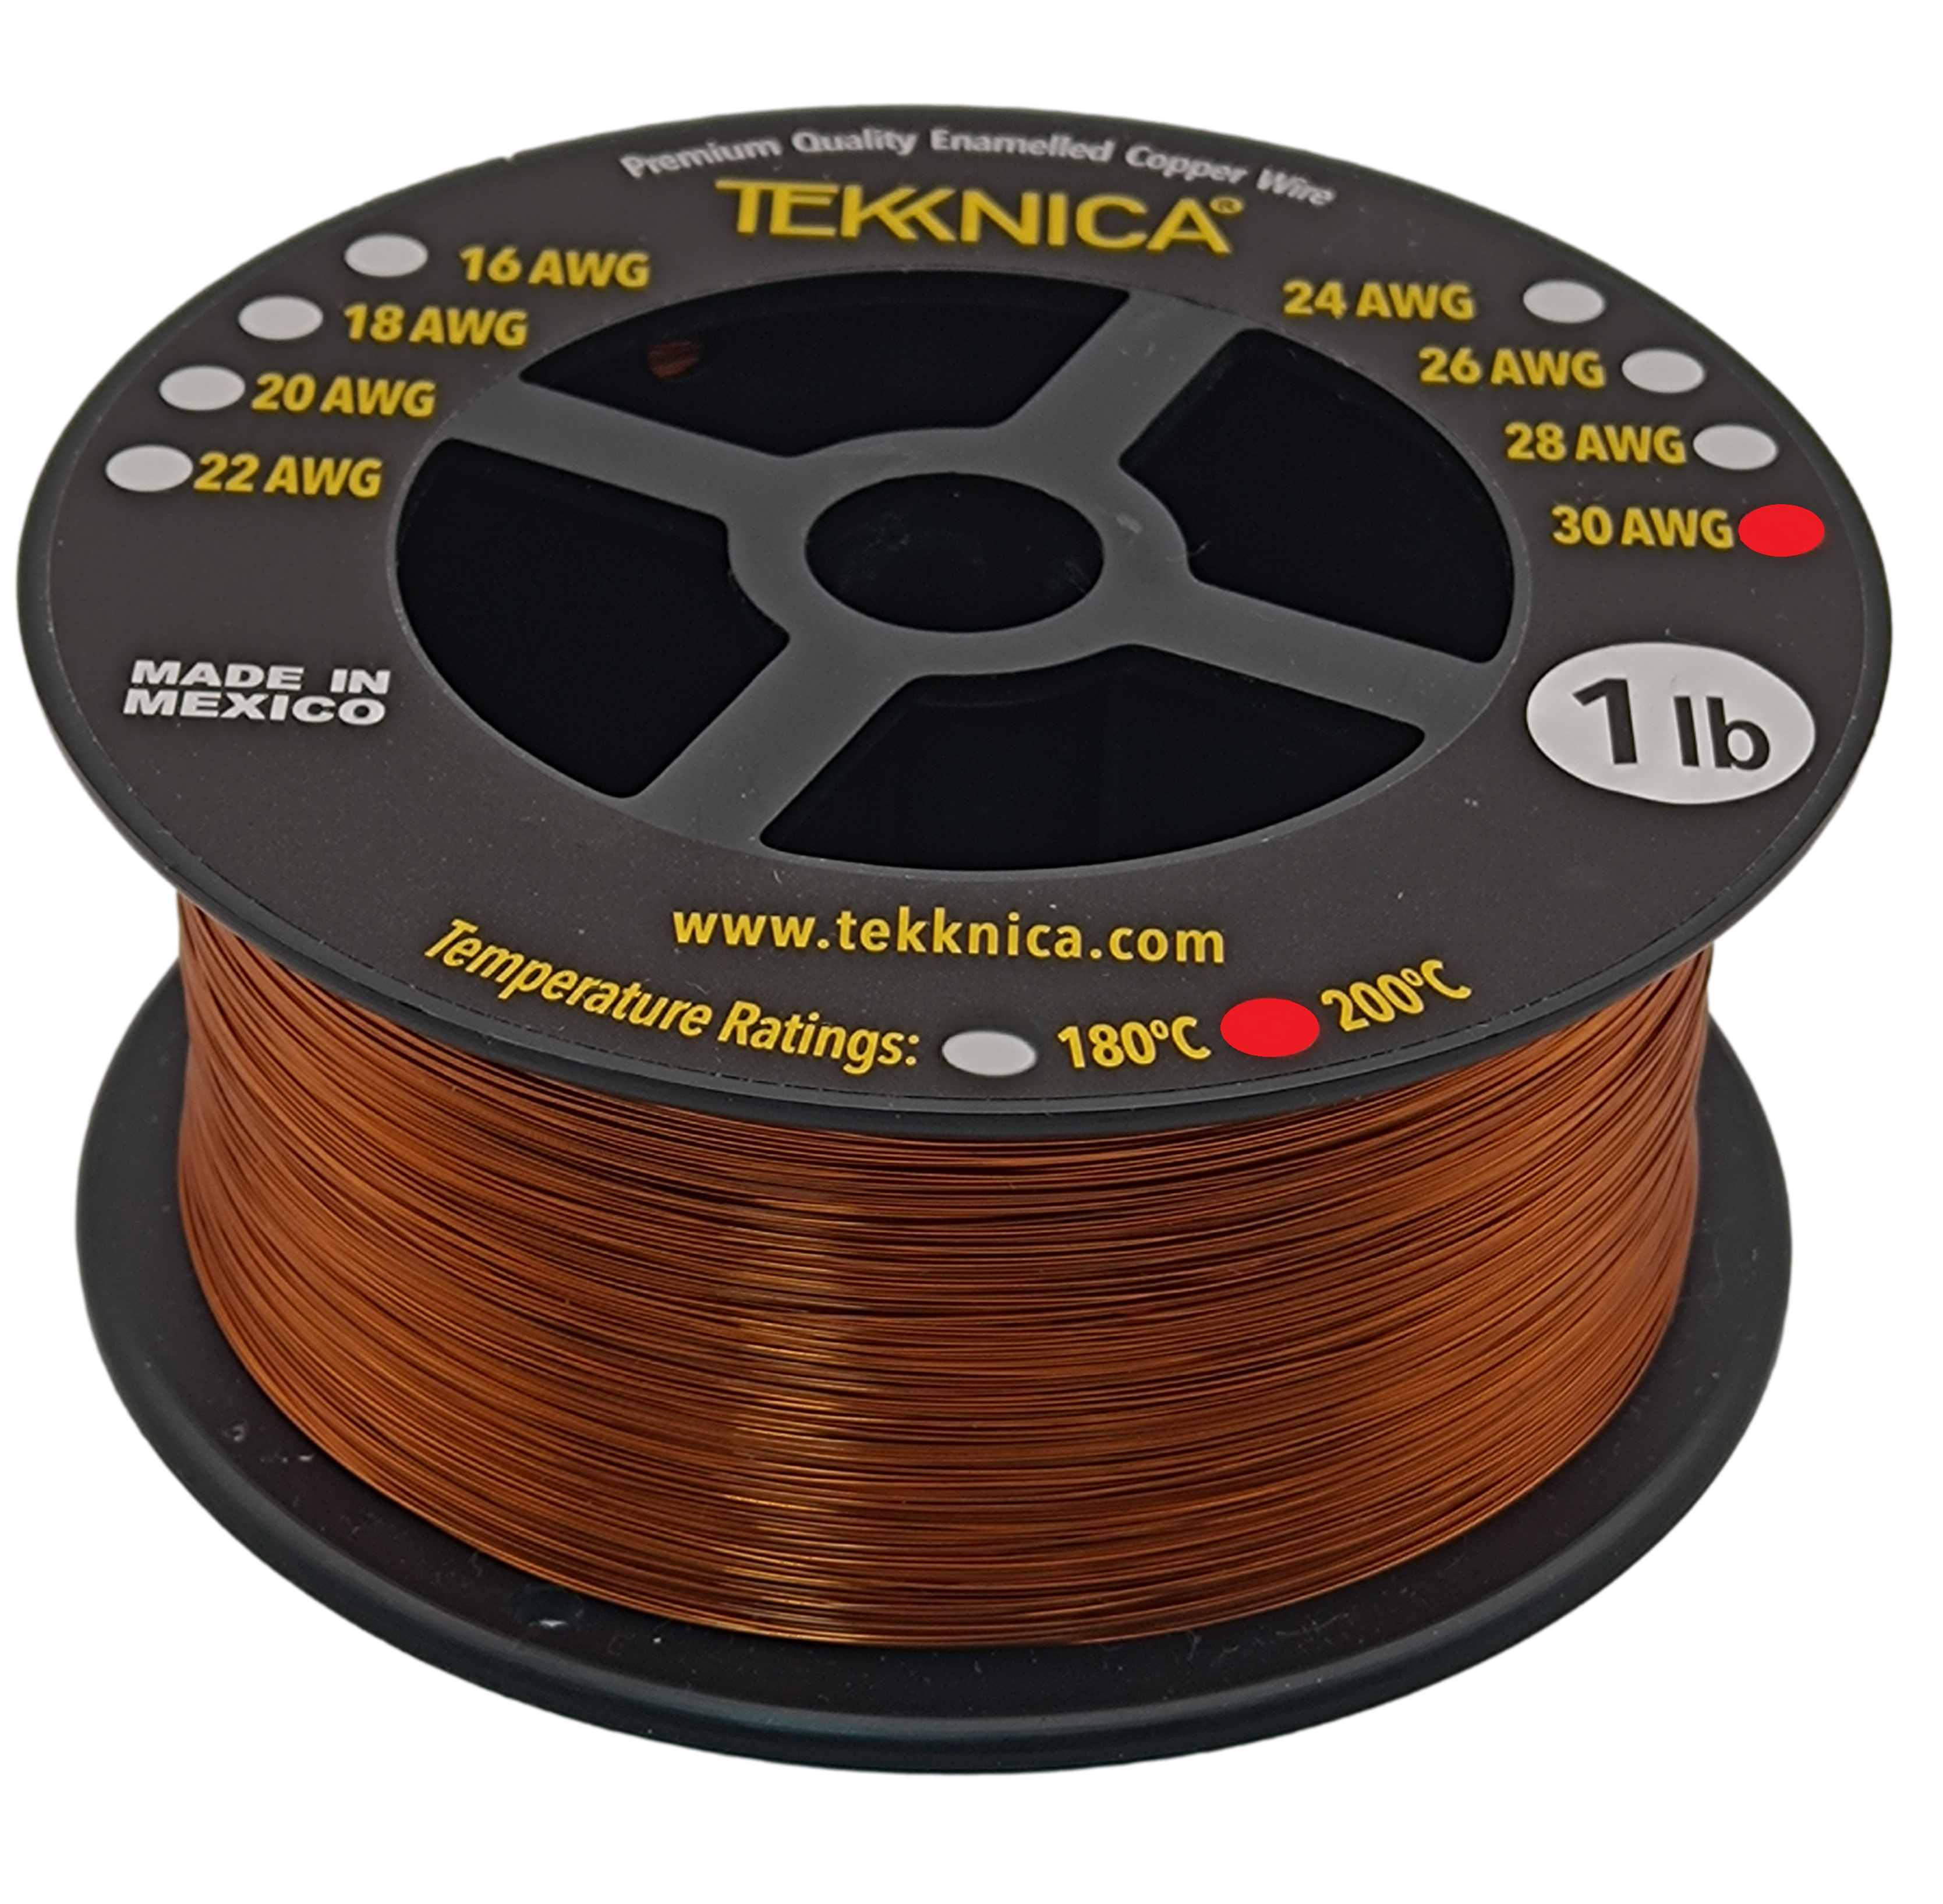 30 Gauge Insulated Magnet Wire, 1/4 Pound Roll (785' Approx